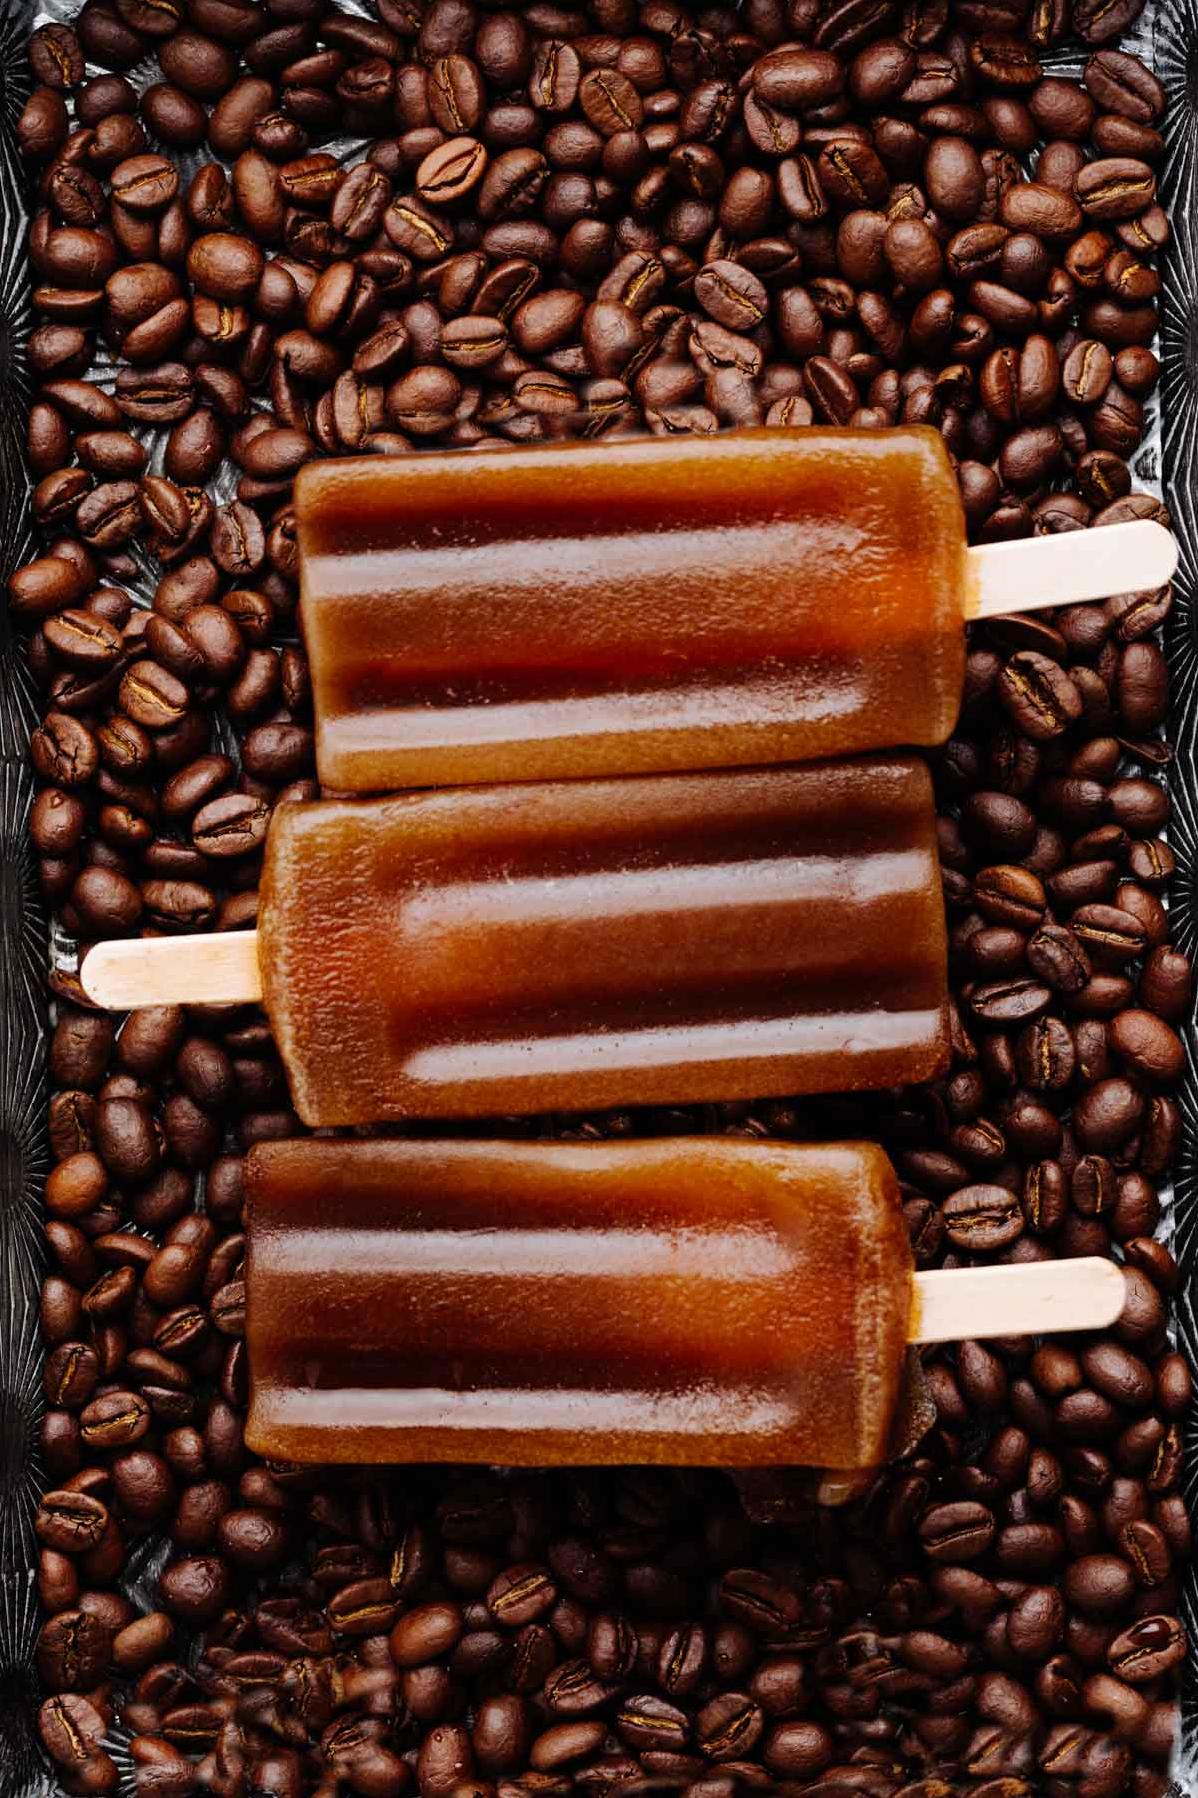  These popsicles are the ultimate treat for coffee lovers.